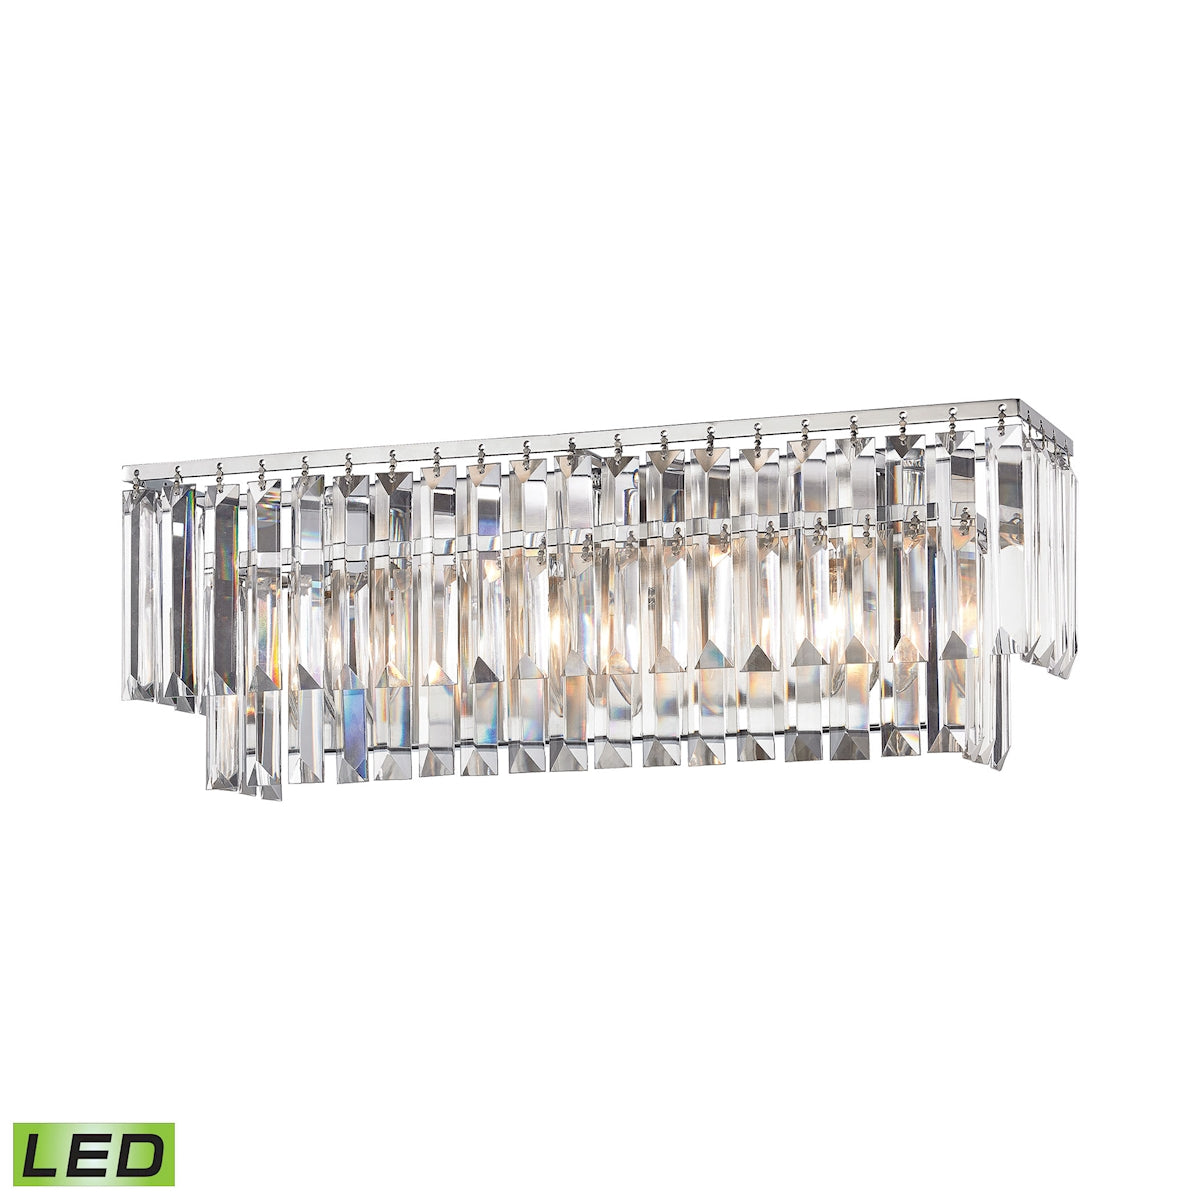 ELK Lighting 15212/3-LED Palacial 3-Light Vanity Sconce in Polished Chrome with Clear Crystal - Includes LED Bulbs